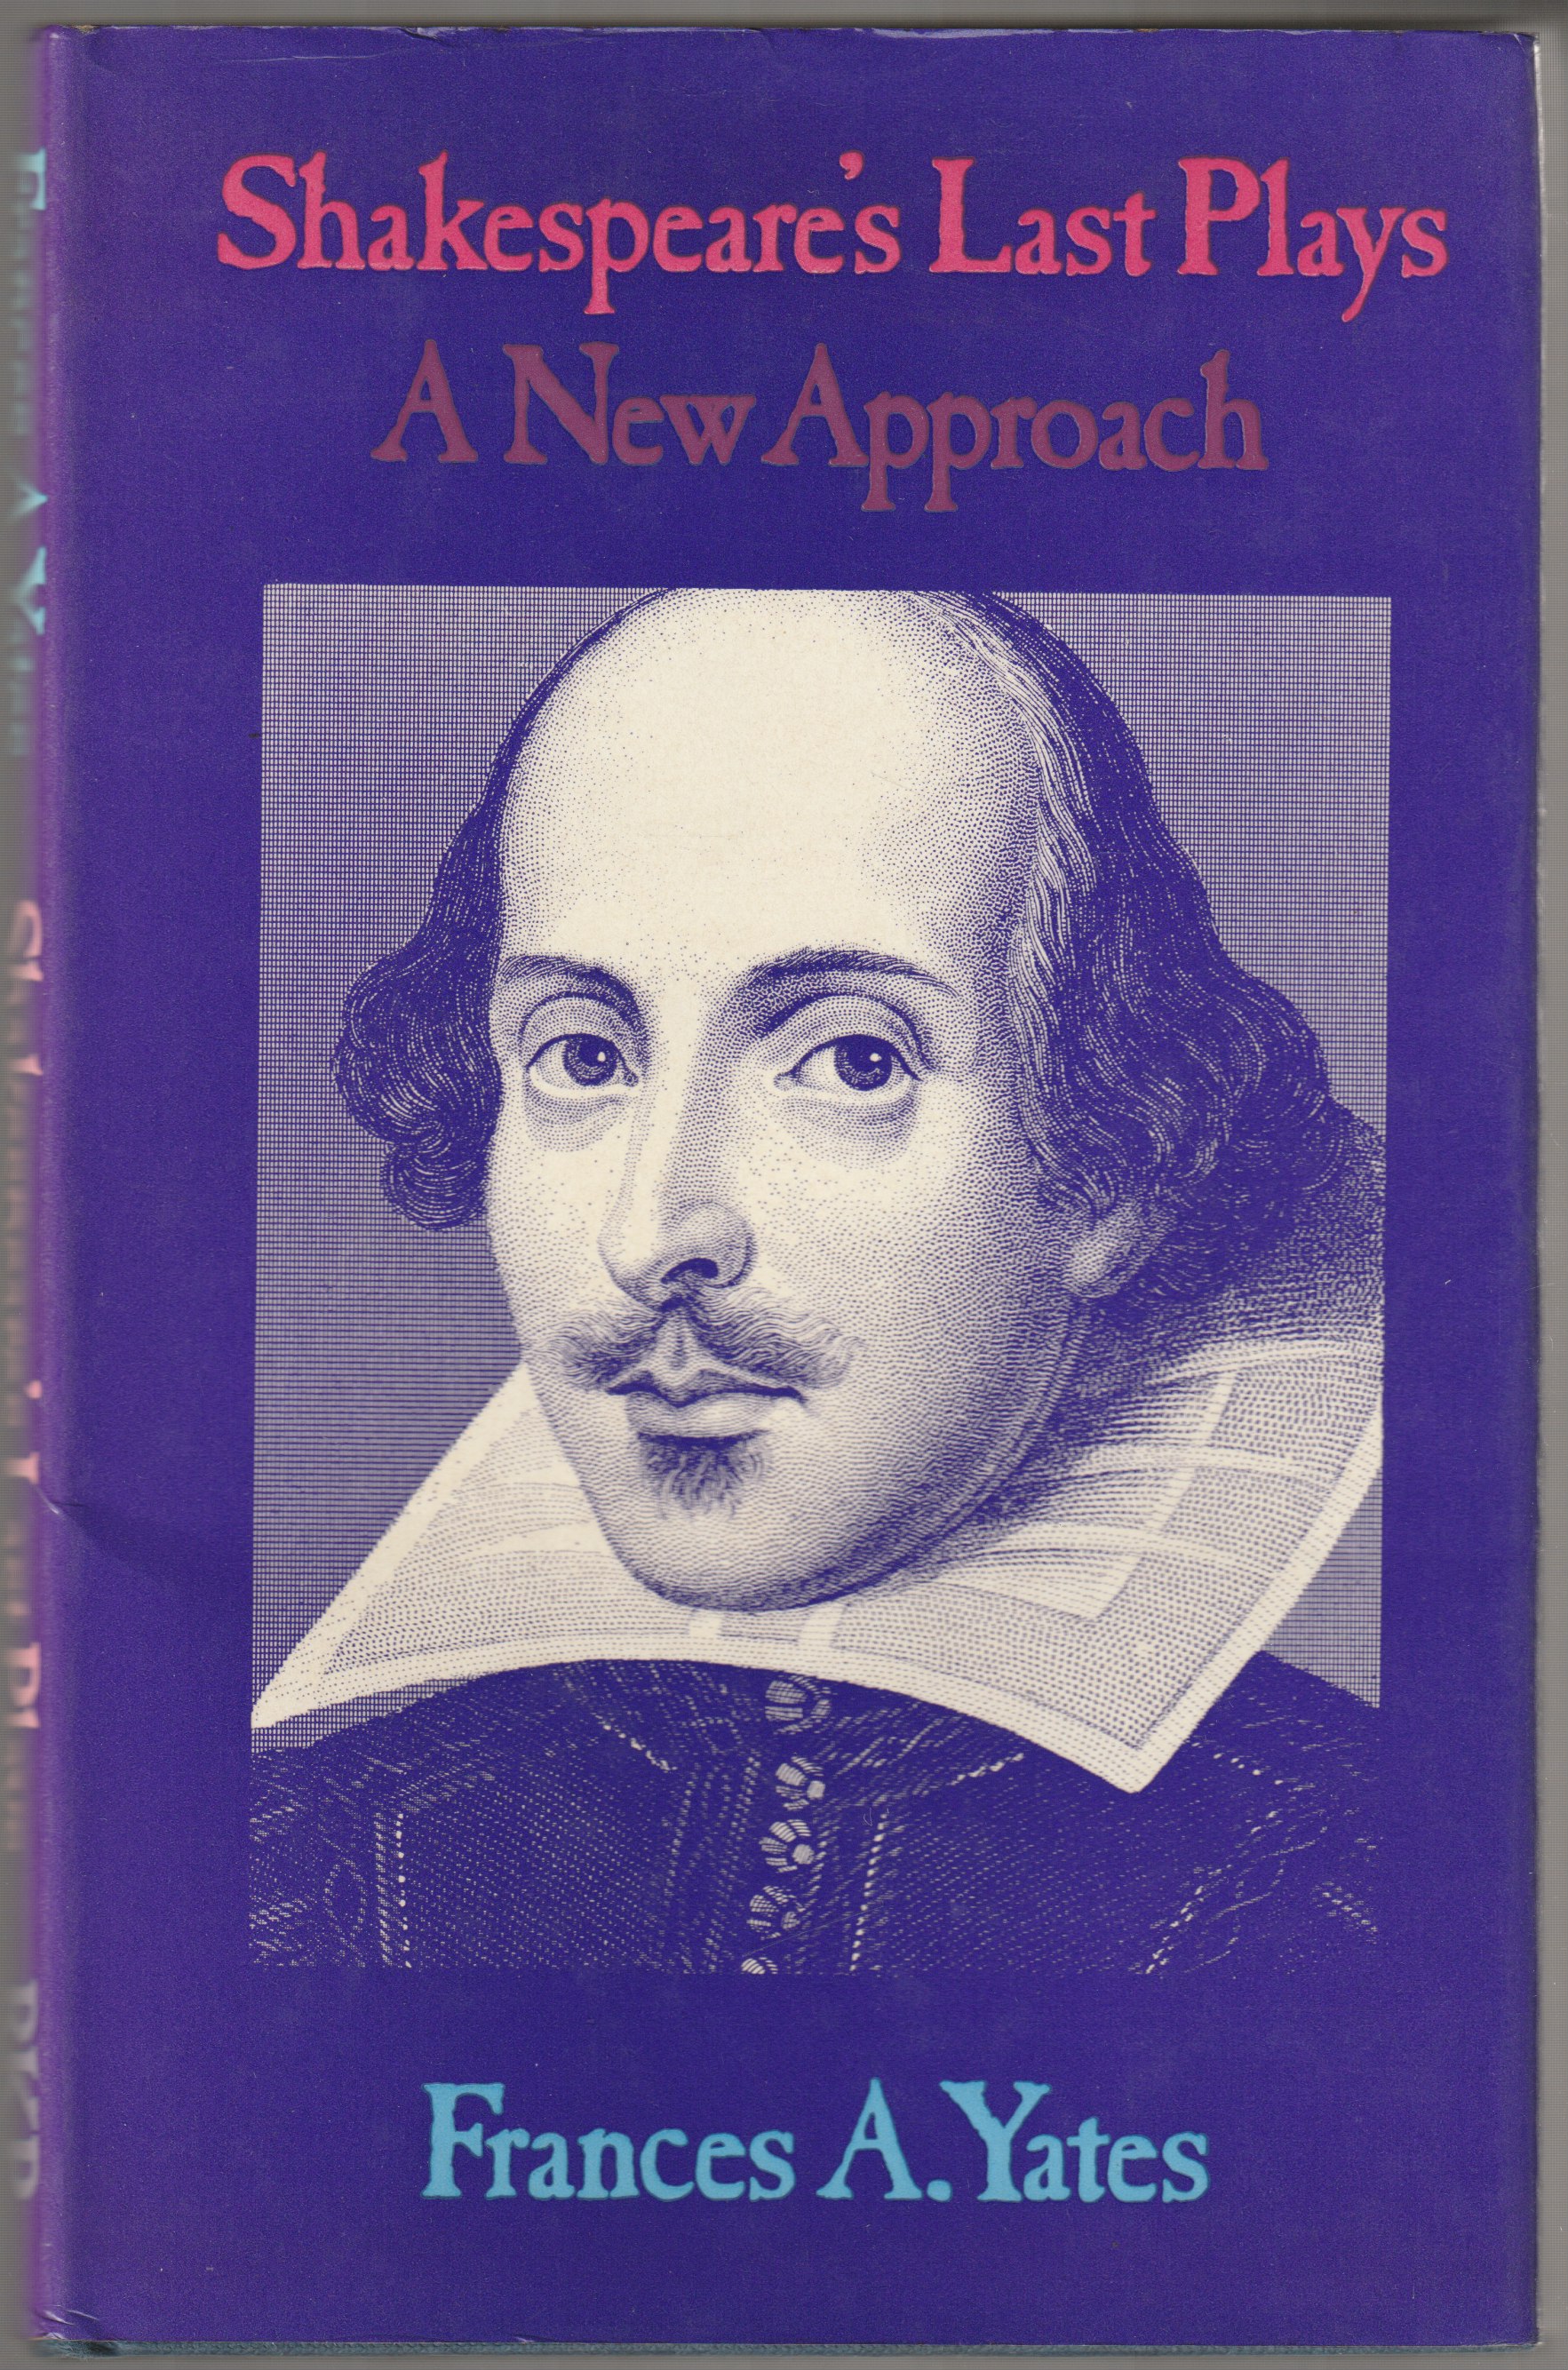 Shakespeare's last plays : a new approach.